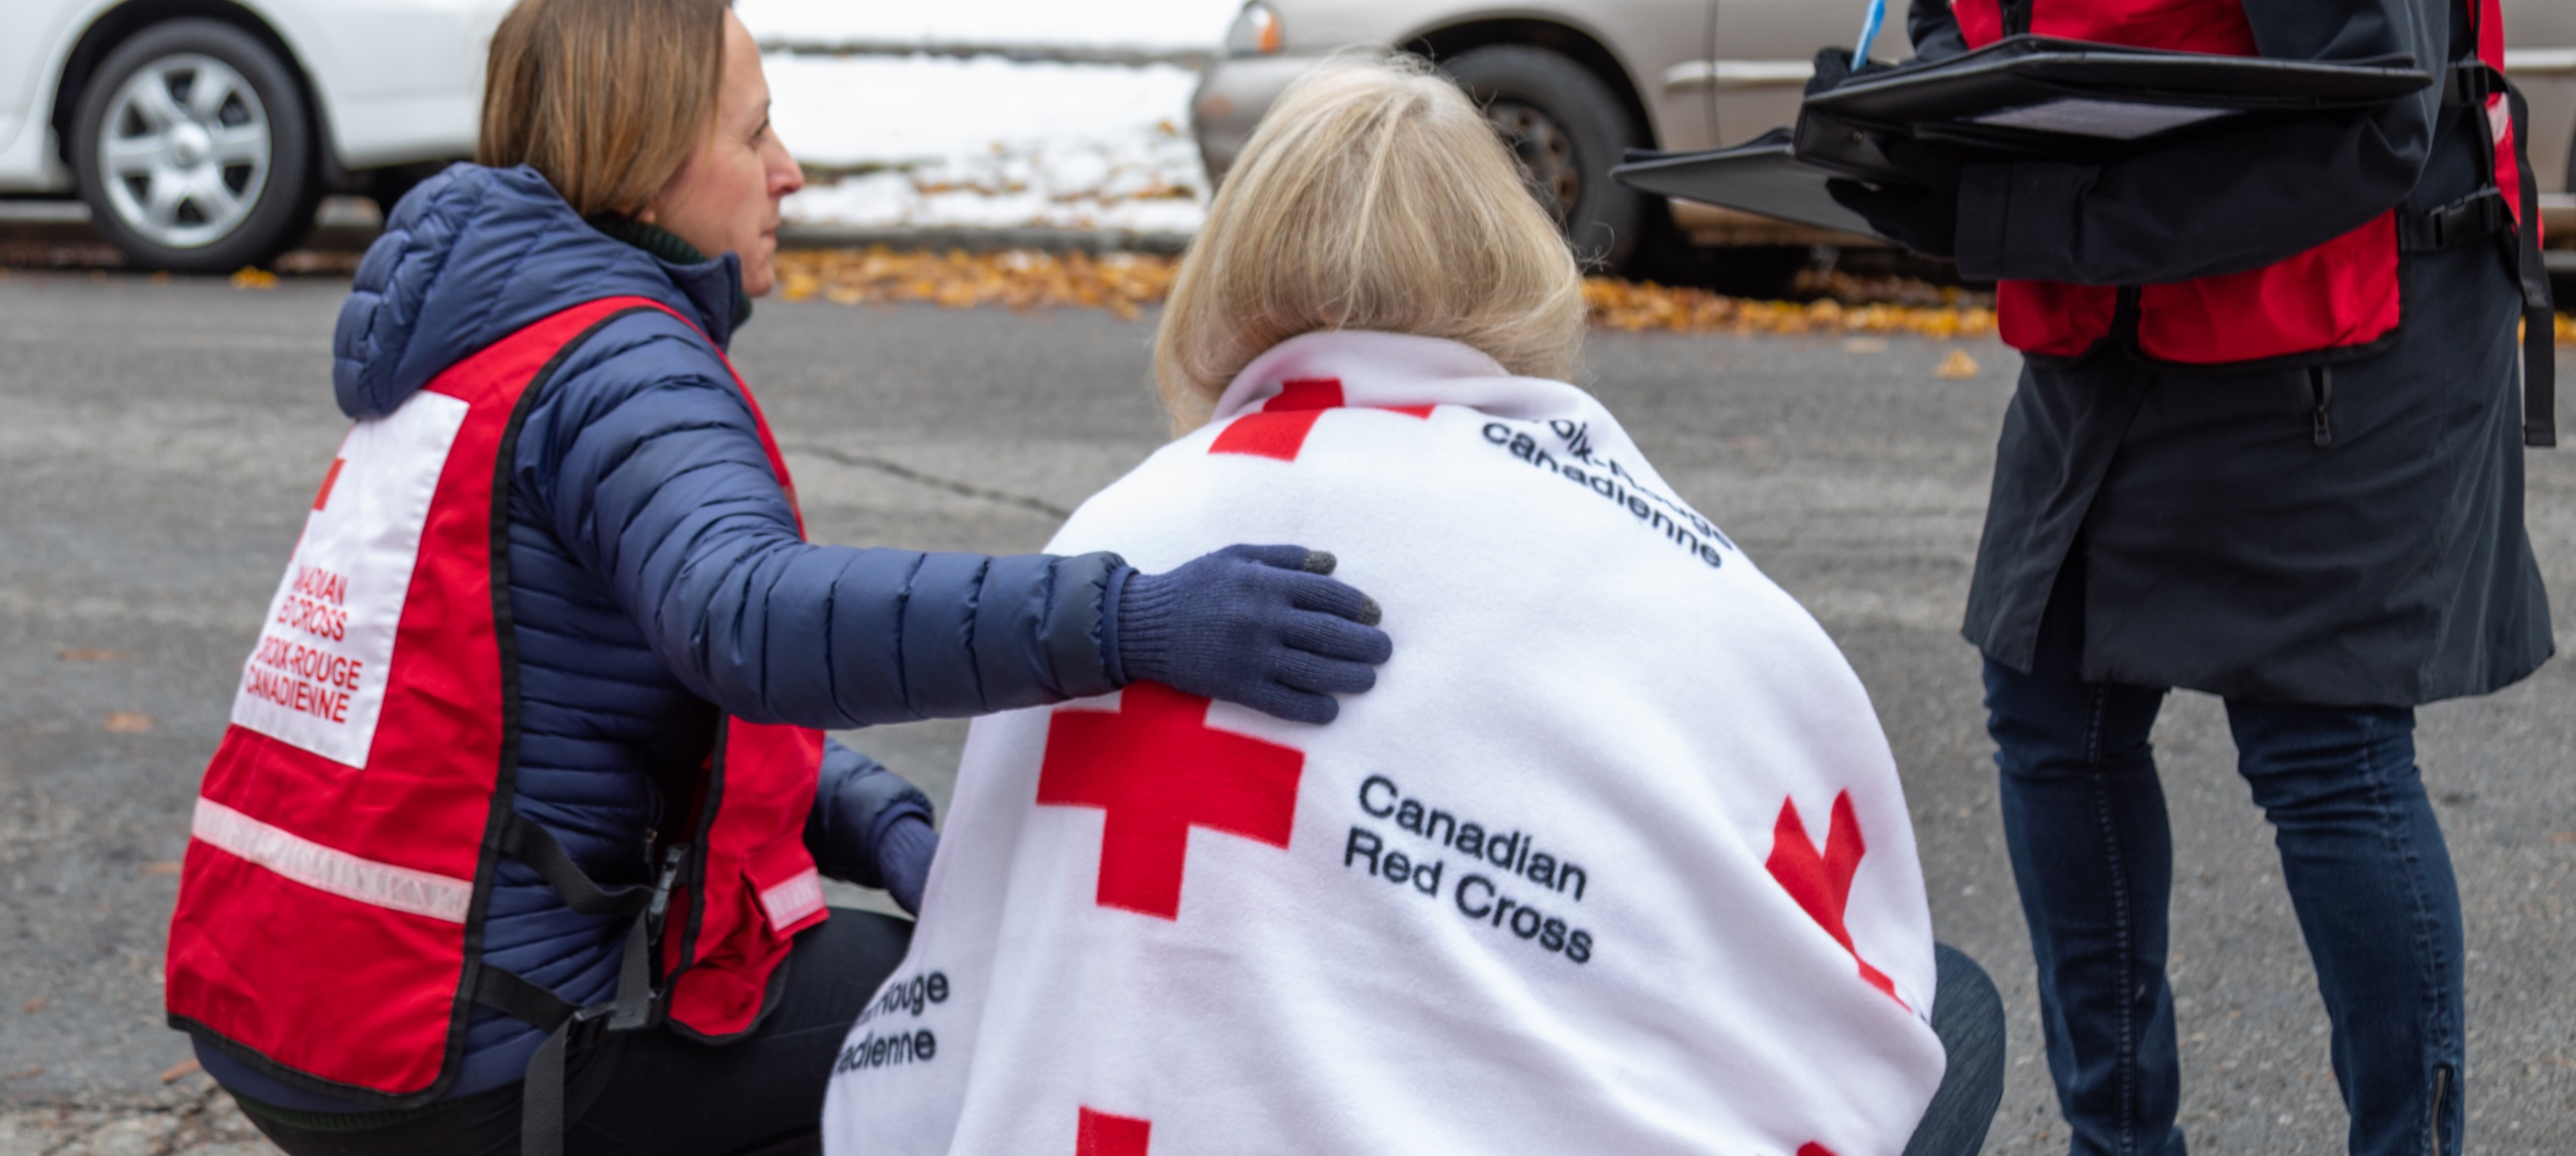 Recipients of Red Cross and Red Crescent aid smiling